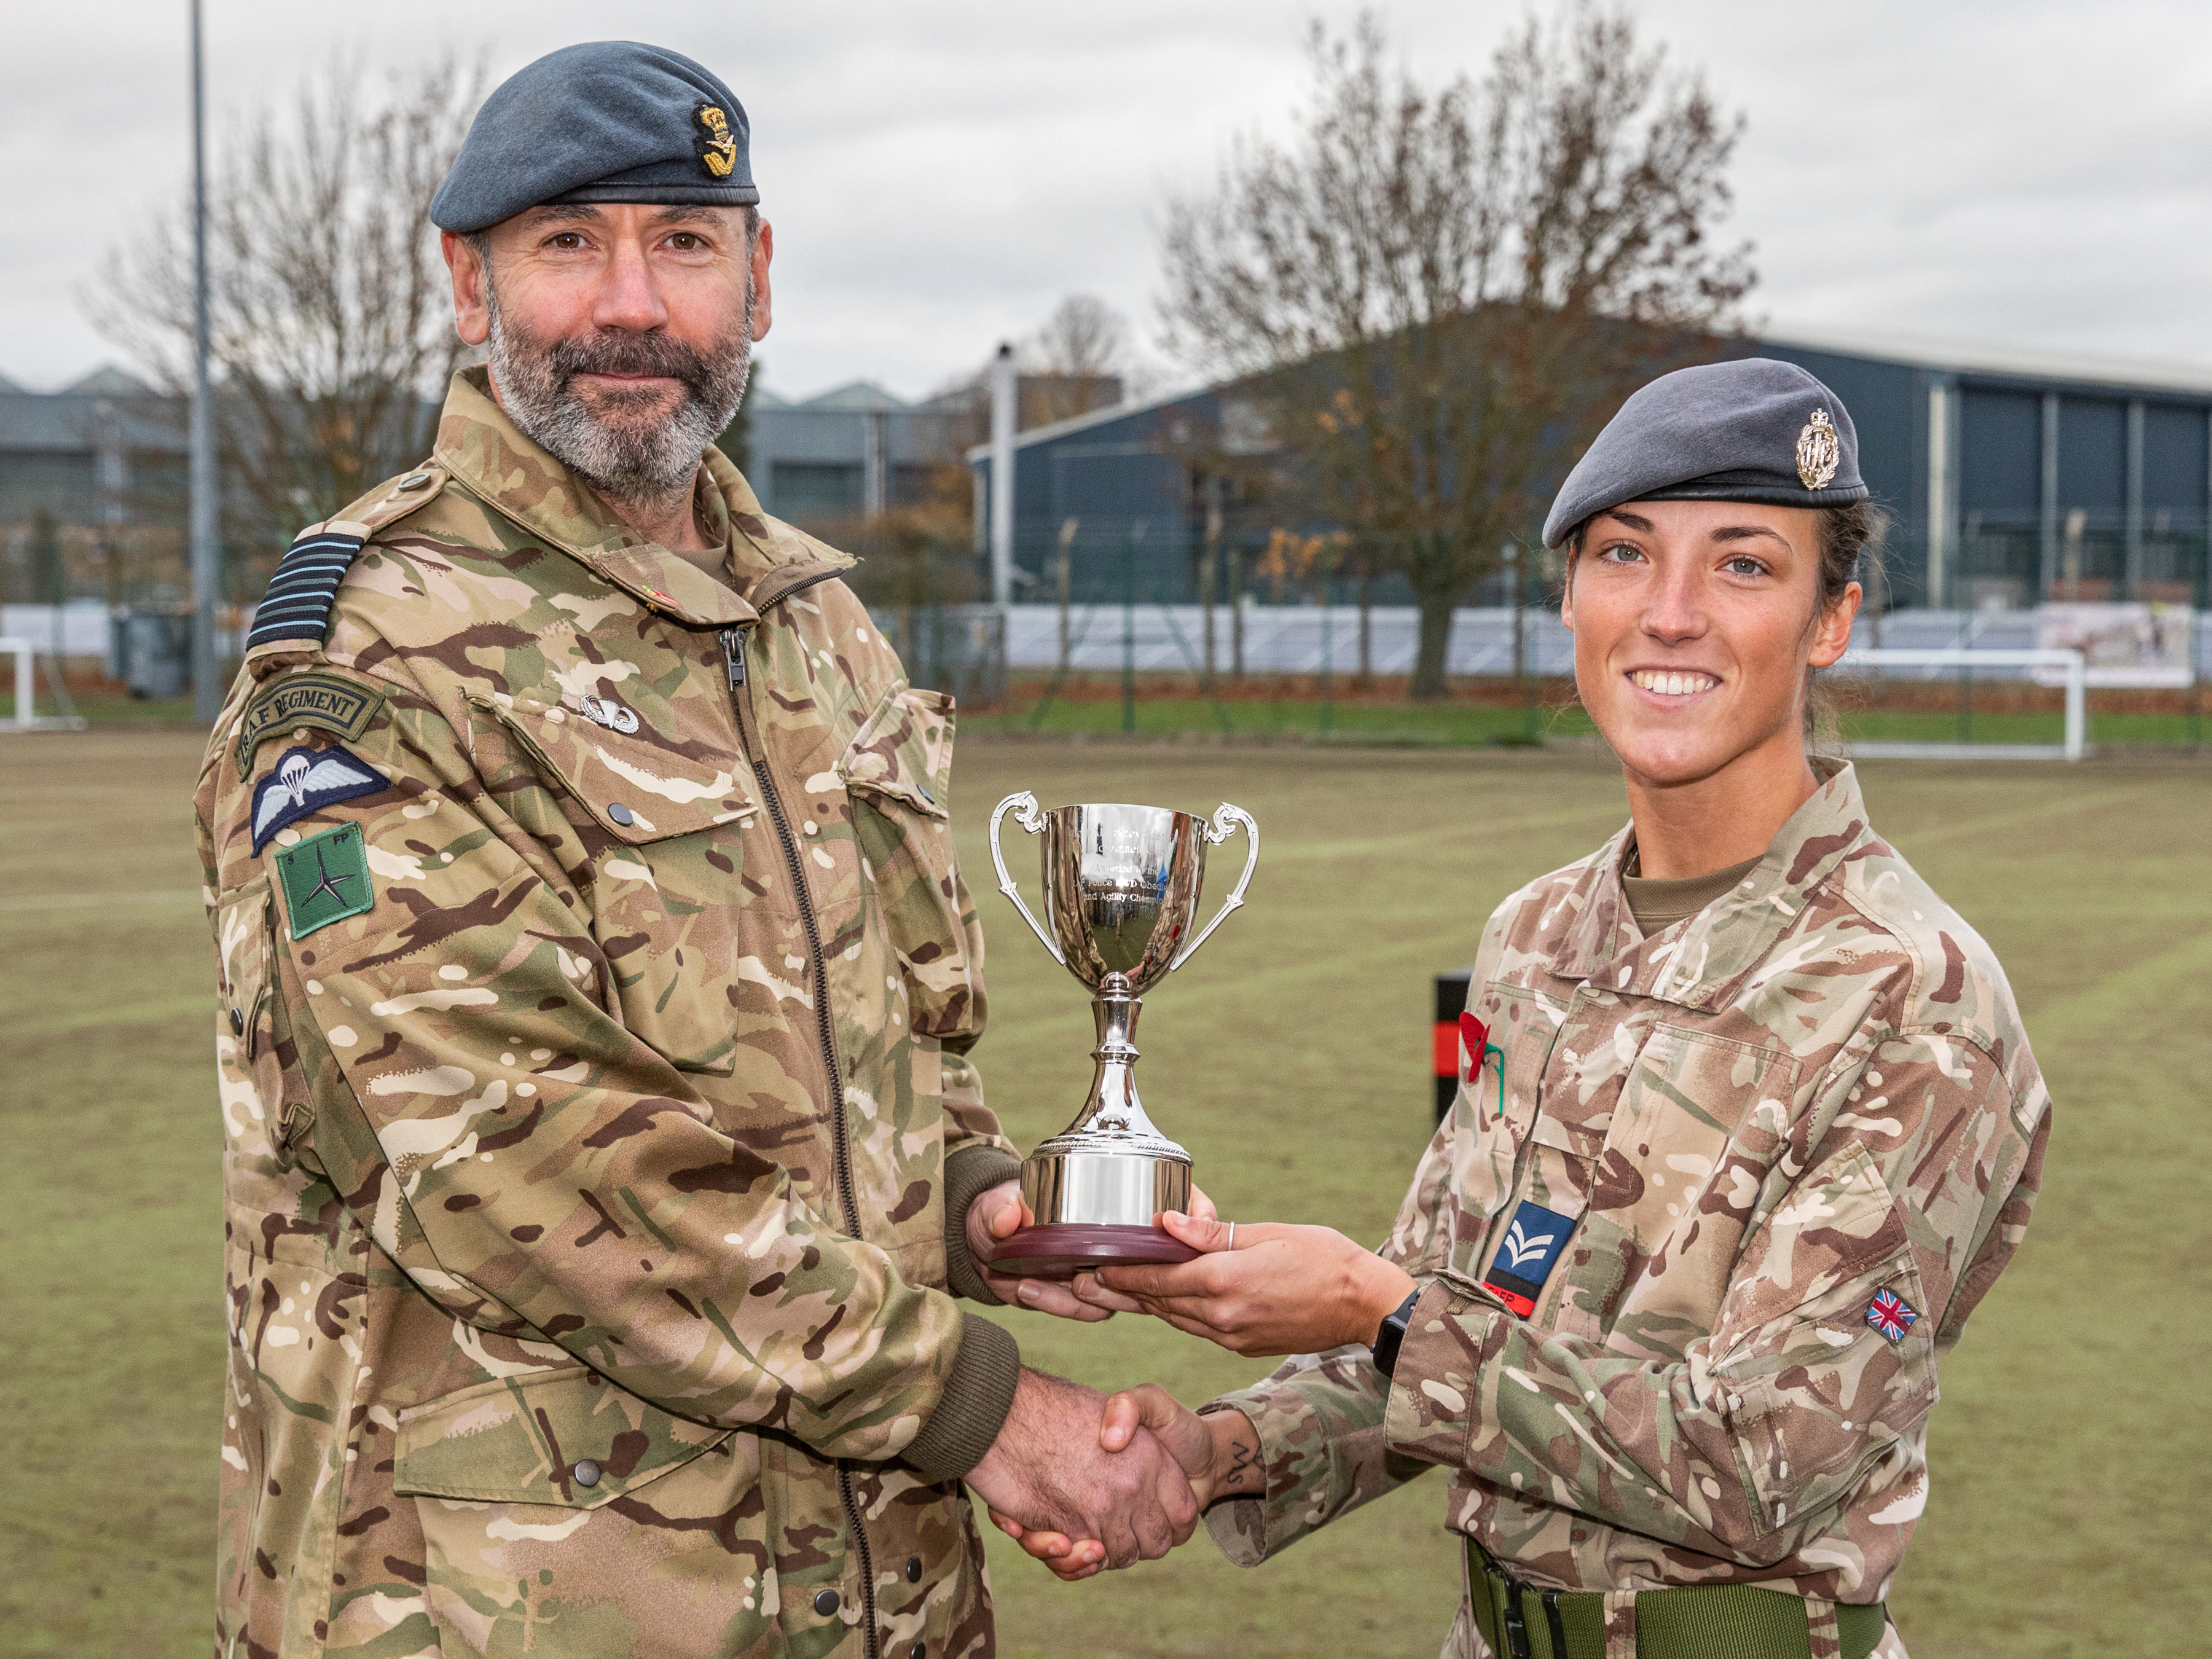 Image shows RAF Police shaking hands and accepting award.